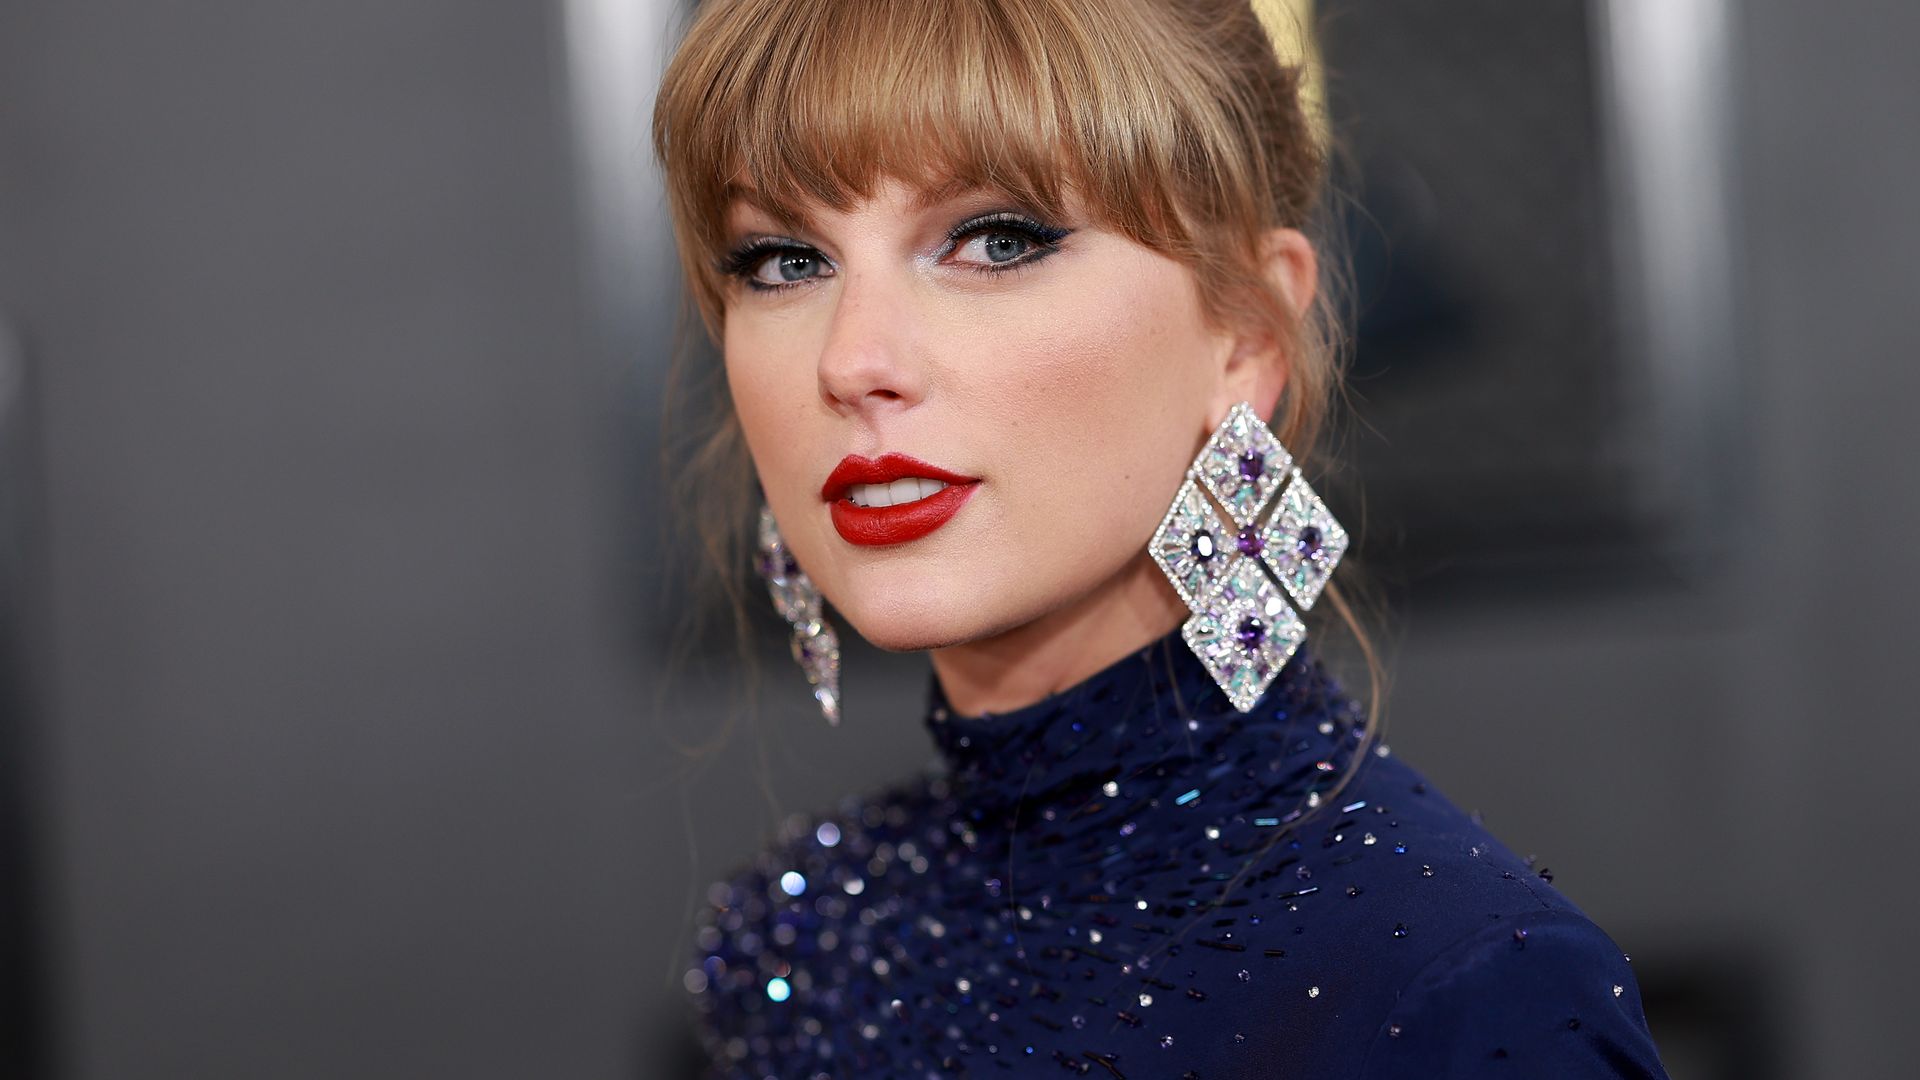 Taylor Swift attends the 65th GRAMMY Awards on February 05, 2023 in Los Angeles, California. (Photo by Matt Winkelmeyer/Getty Images for The Recording Academy)